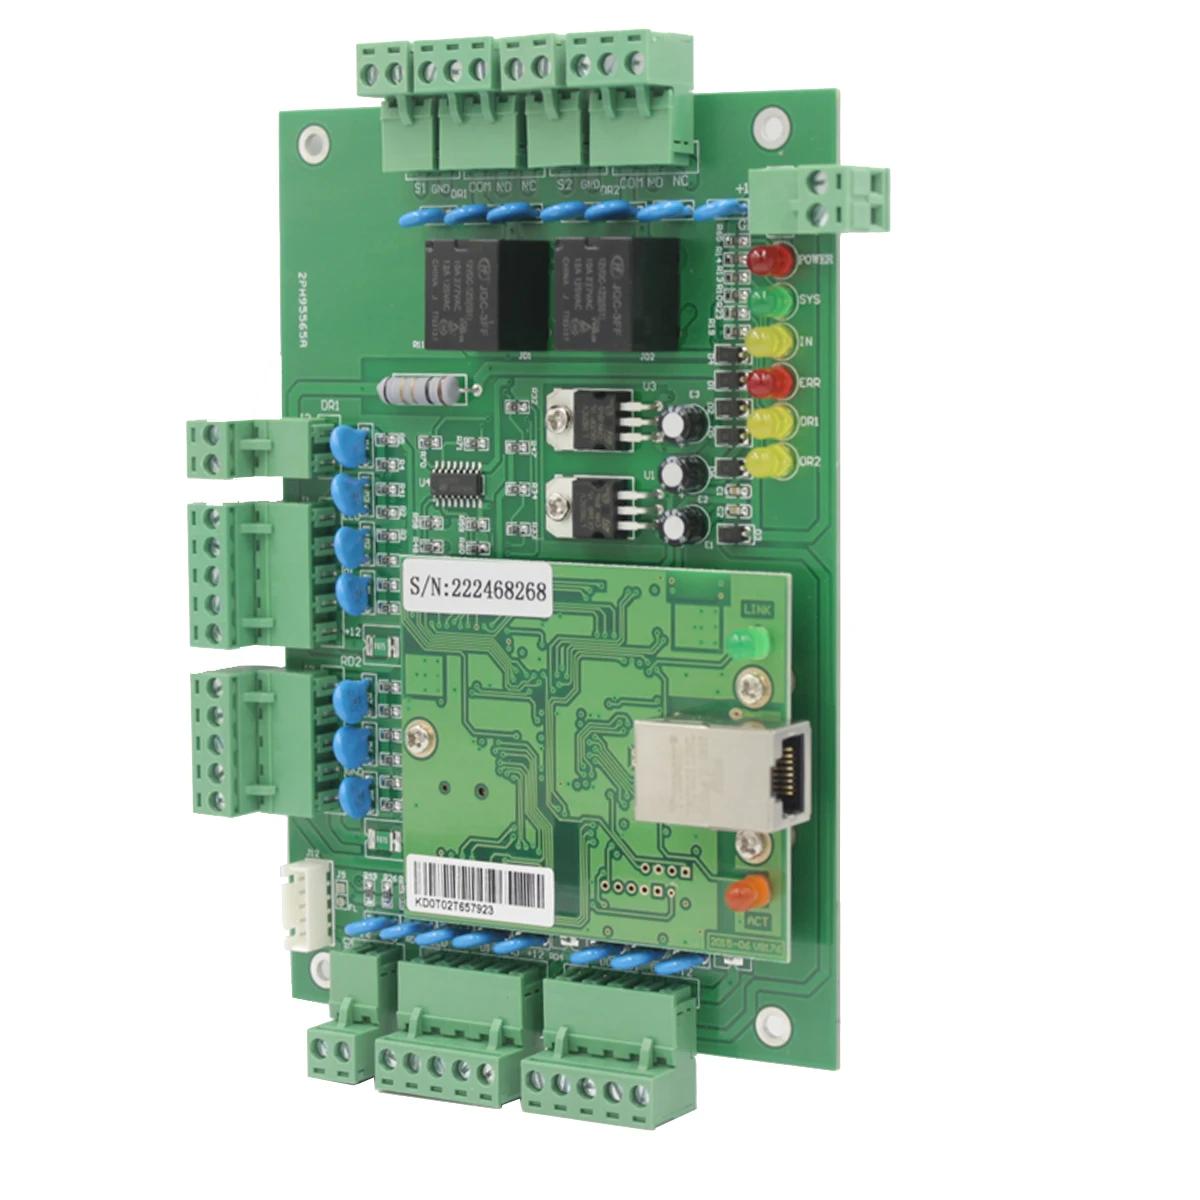 Network Entry Access Control Board TCP/IP Panel 2 RFID Reader PIN Keypad Wiegand 602105008426 